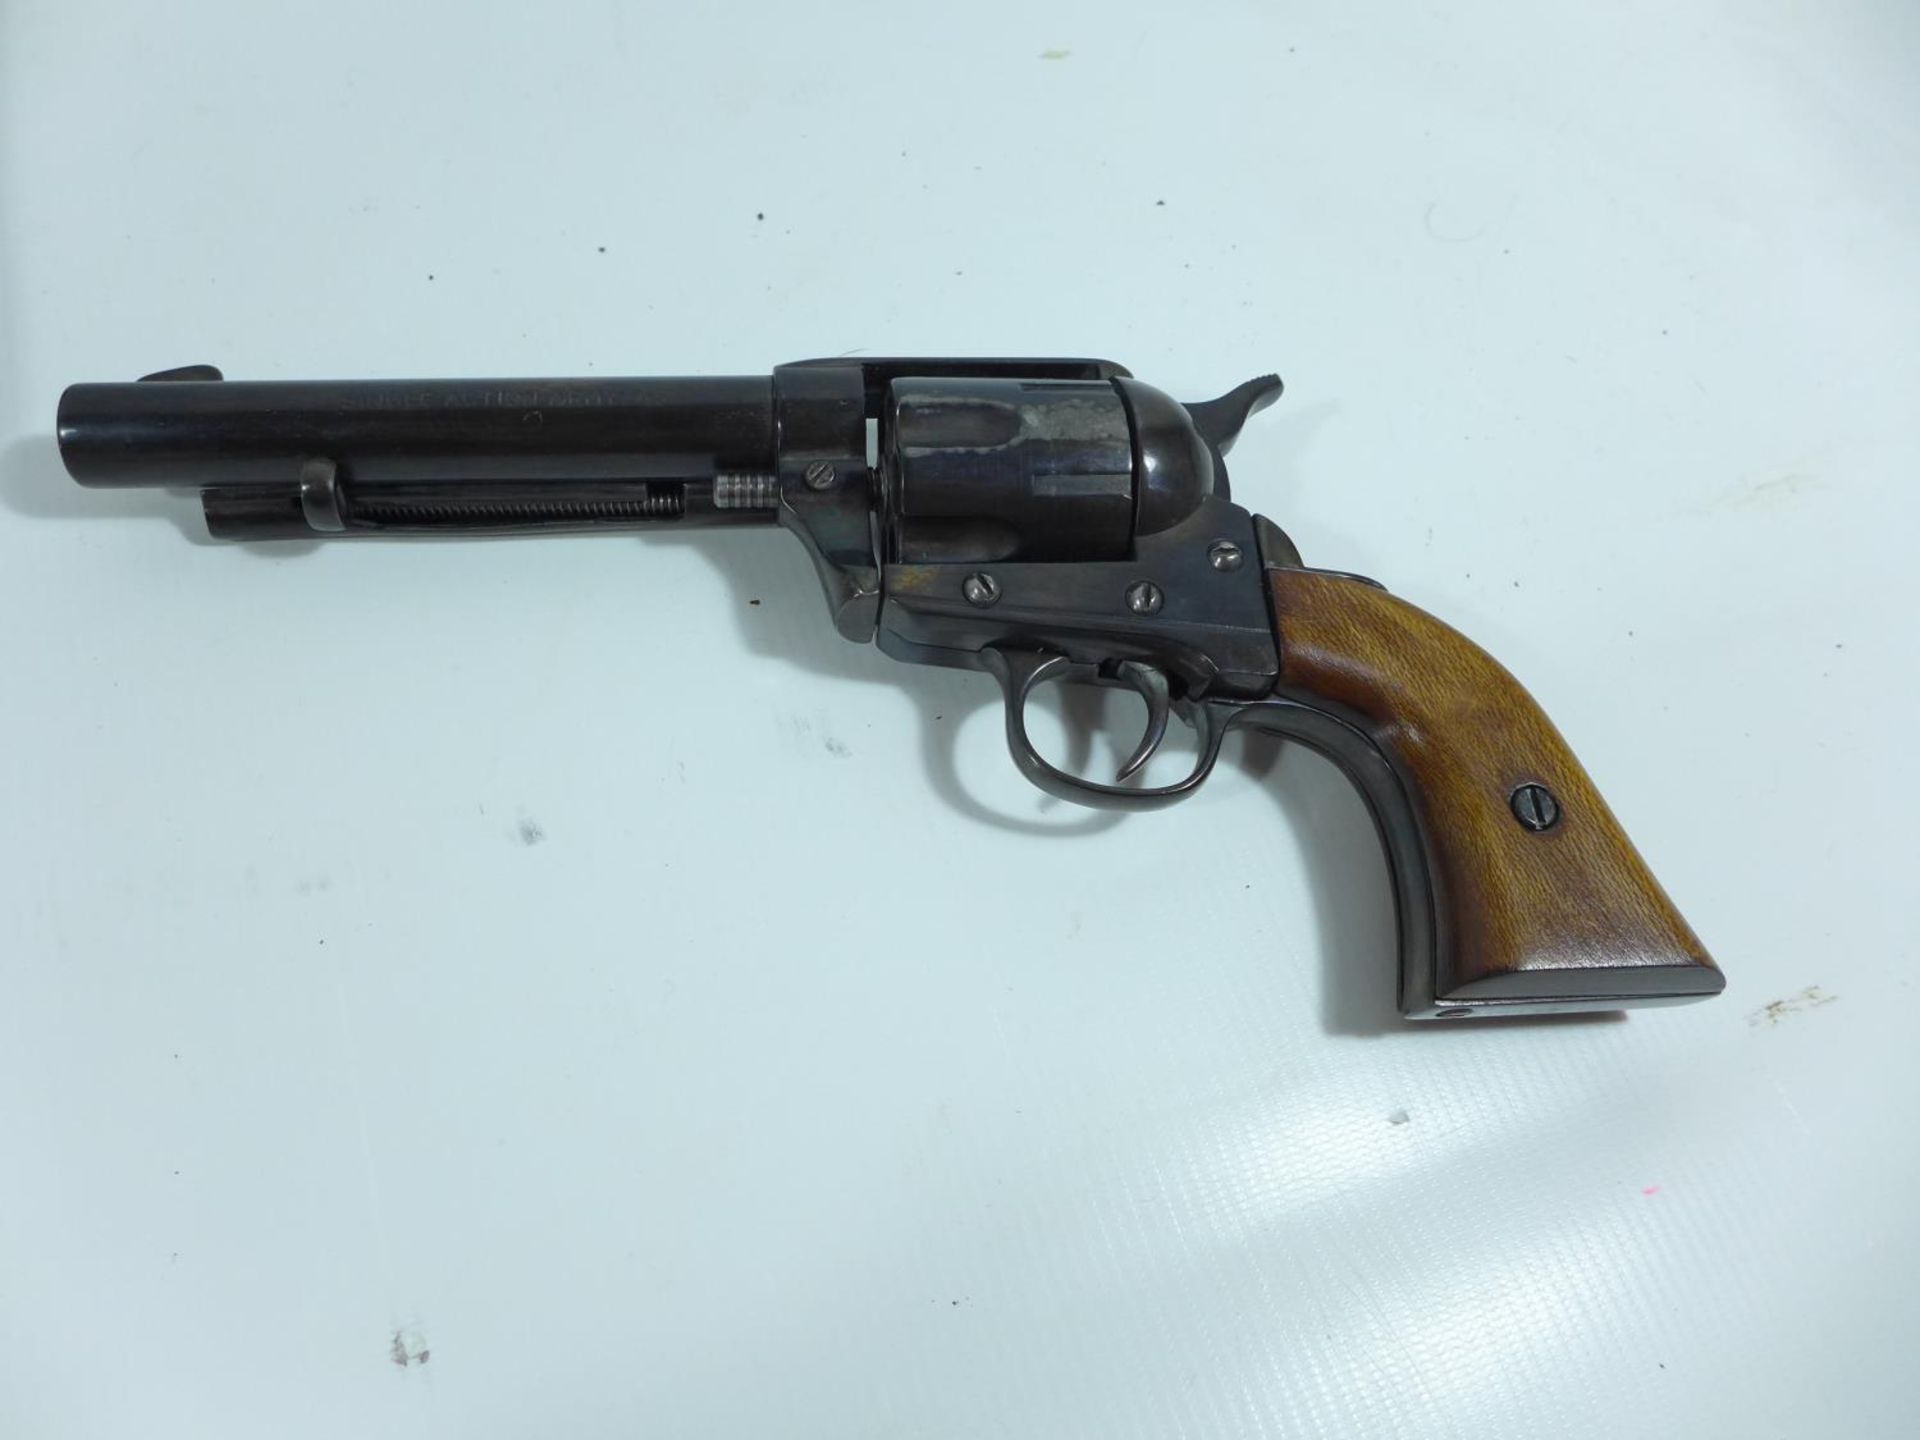 A CASED BLANK FIRING COLT SINGLE ACTION ARMY REVOLVER, 13.5CM BARREL, LENGTH 28CM, COMPLETE WITH - Image 5 of 8